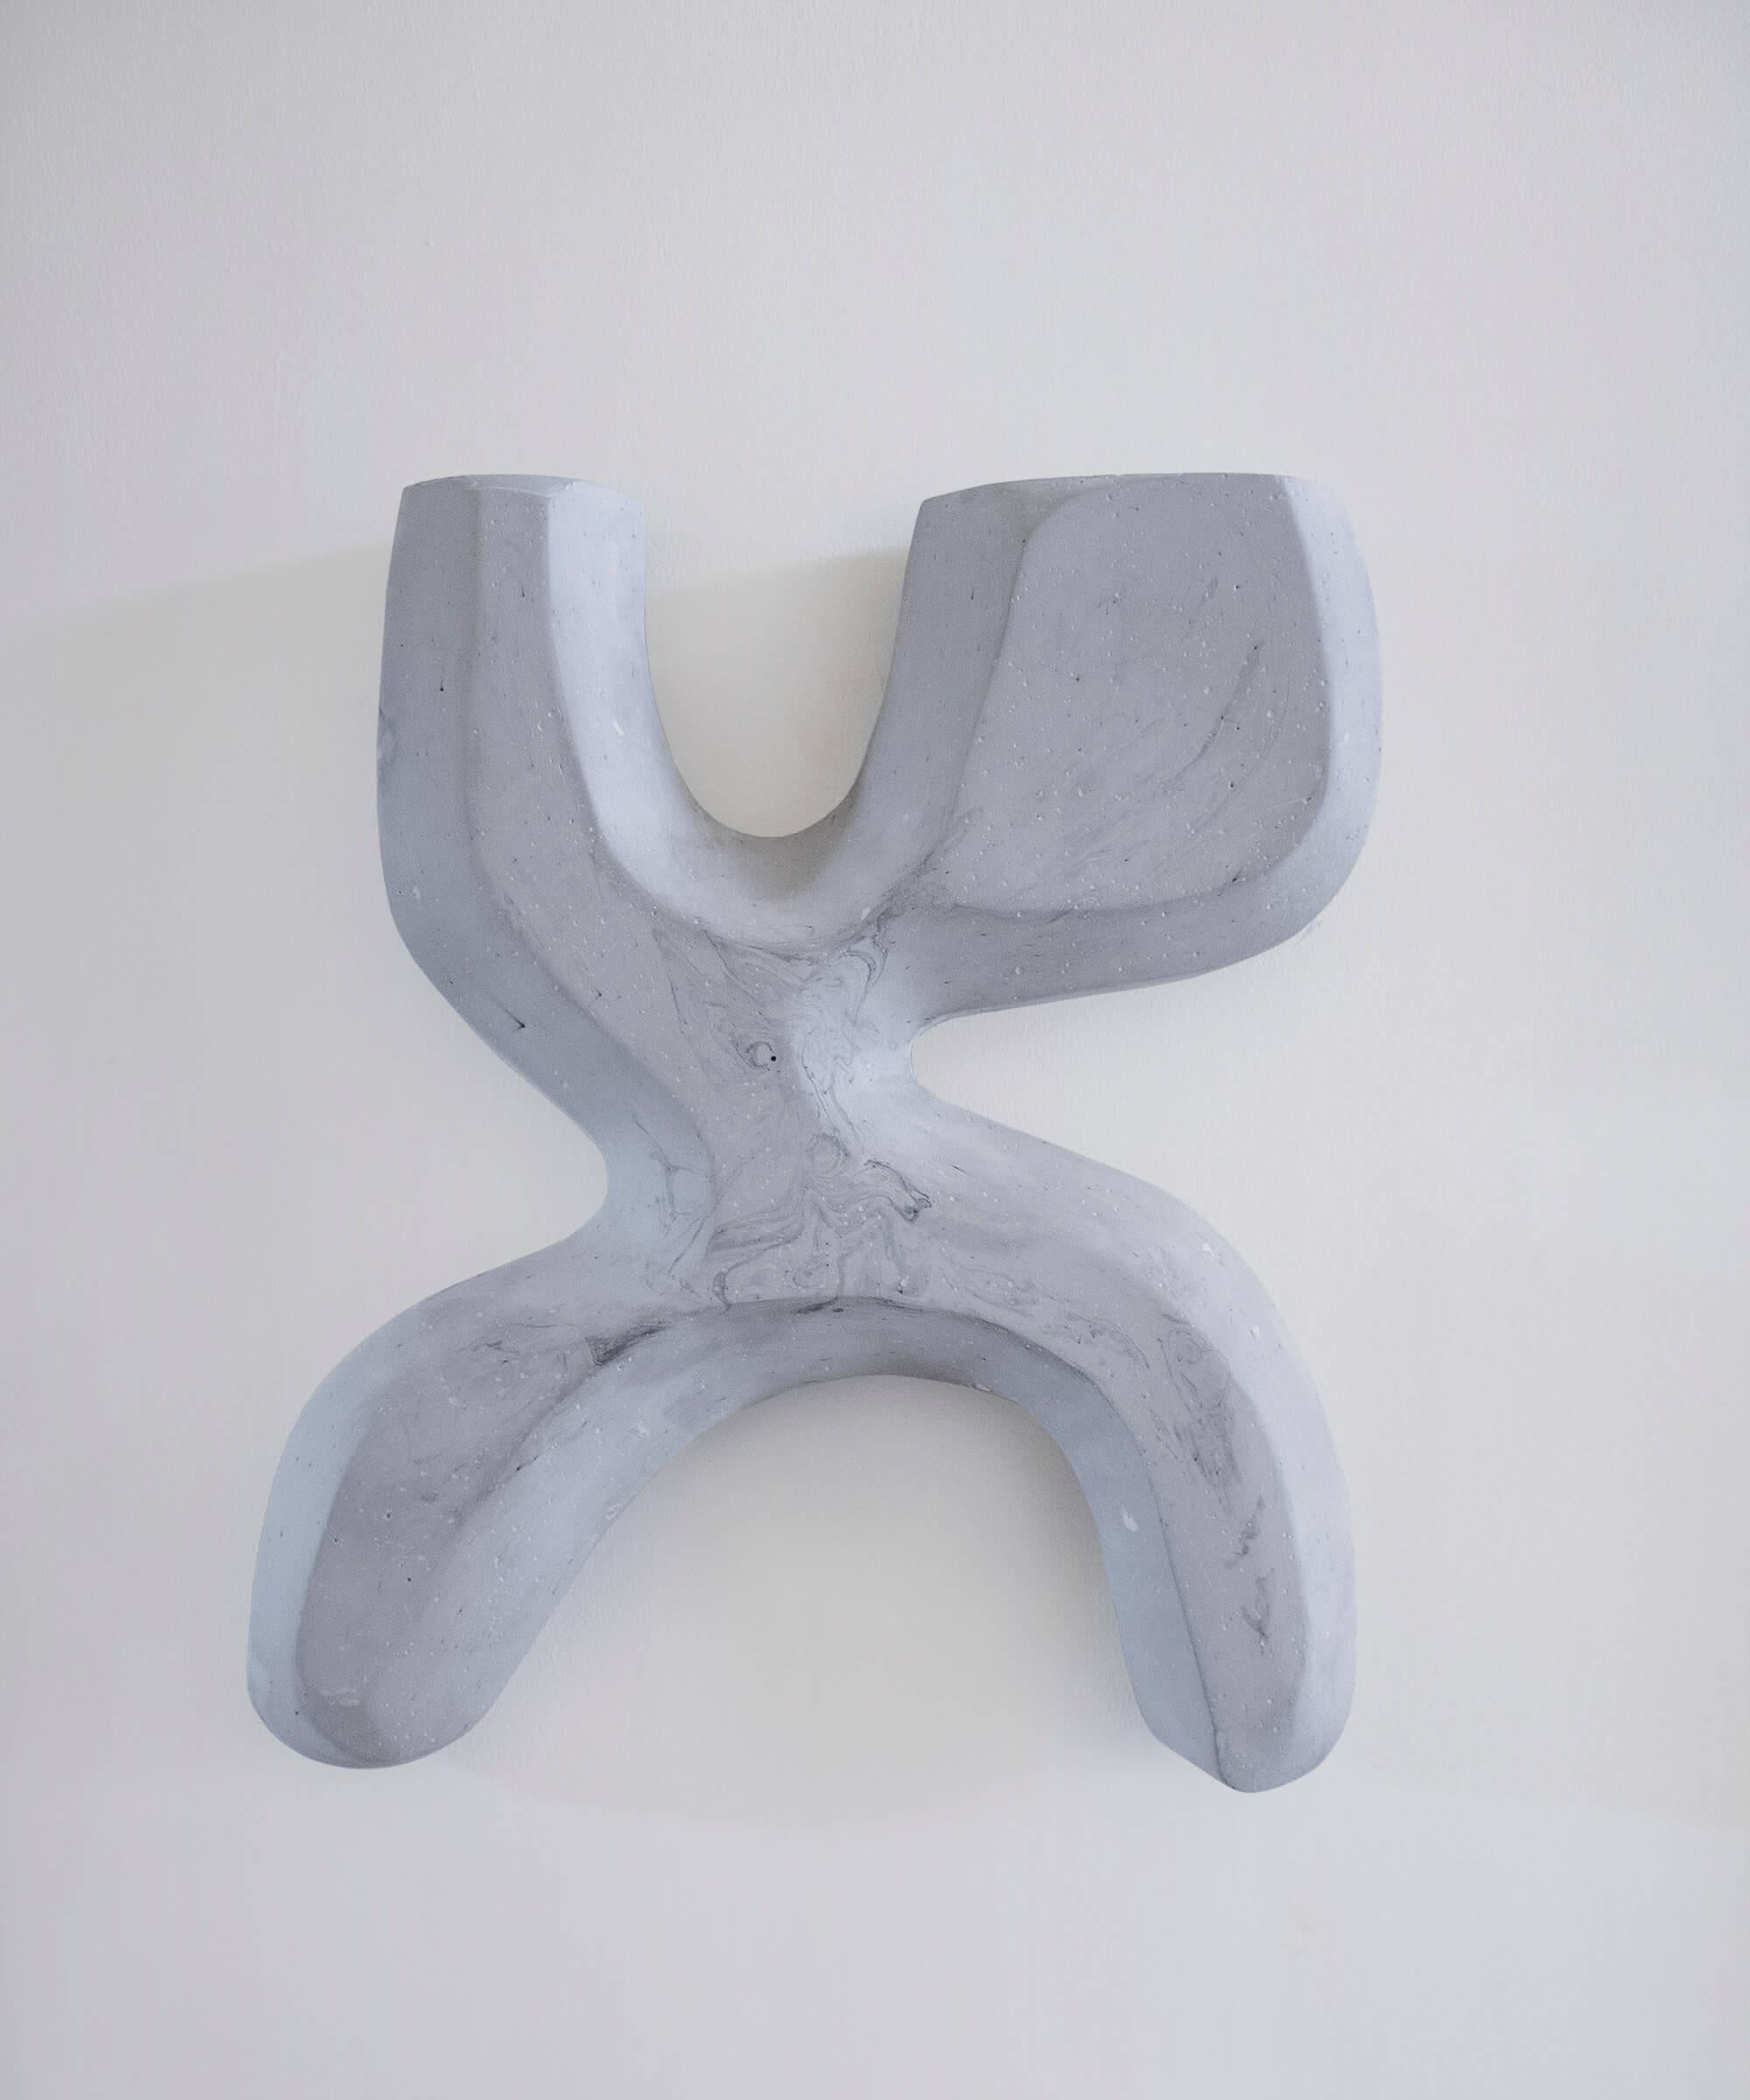 Sculpture Form No_003 by AOAO
Dimensions: W 37 x D 6 x H 41 cm
Materials: Grey plaster
Color options available upon request.

The idea was born after deciding to reconnect with my family and my grandfather – a sculptor artist. Learning to sculpt and